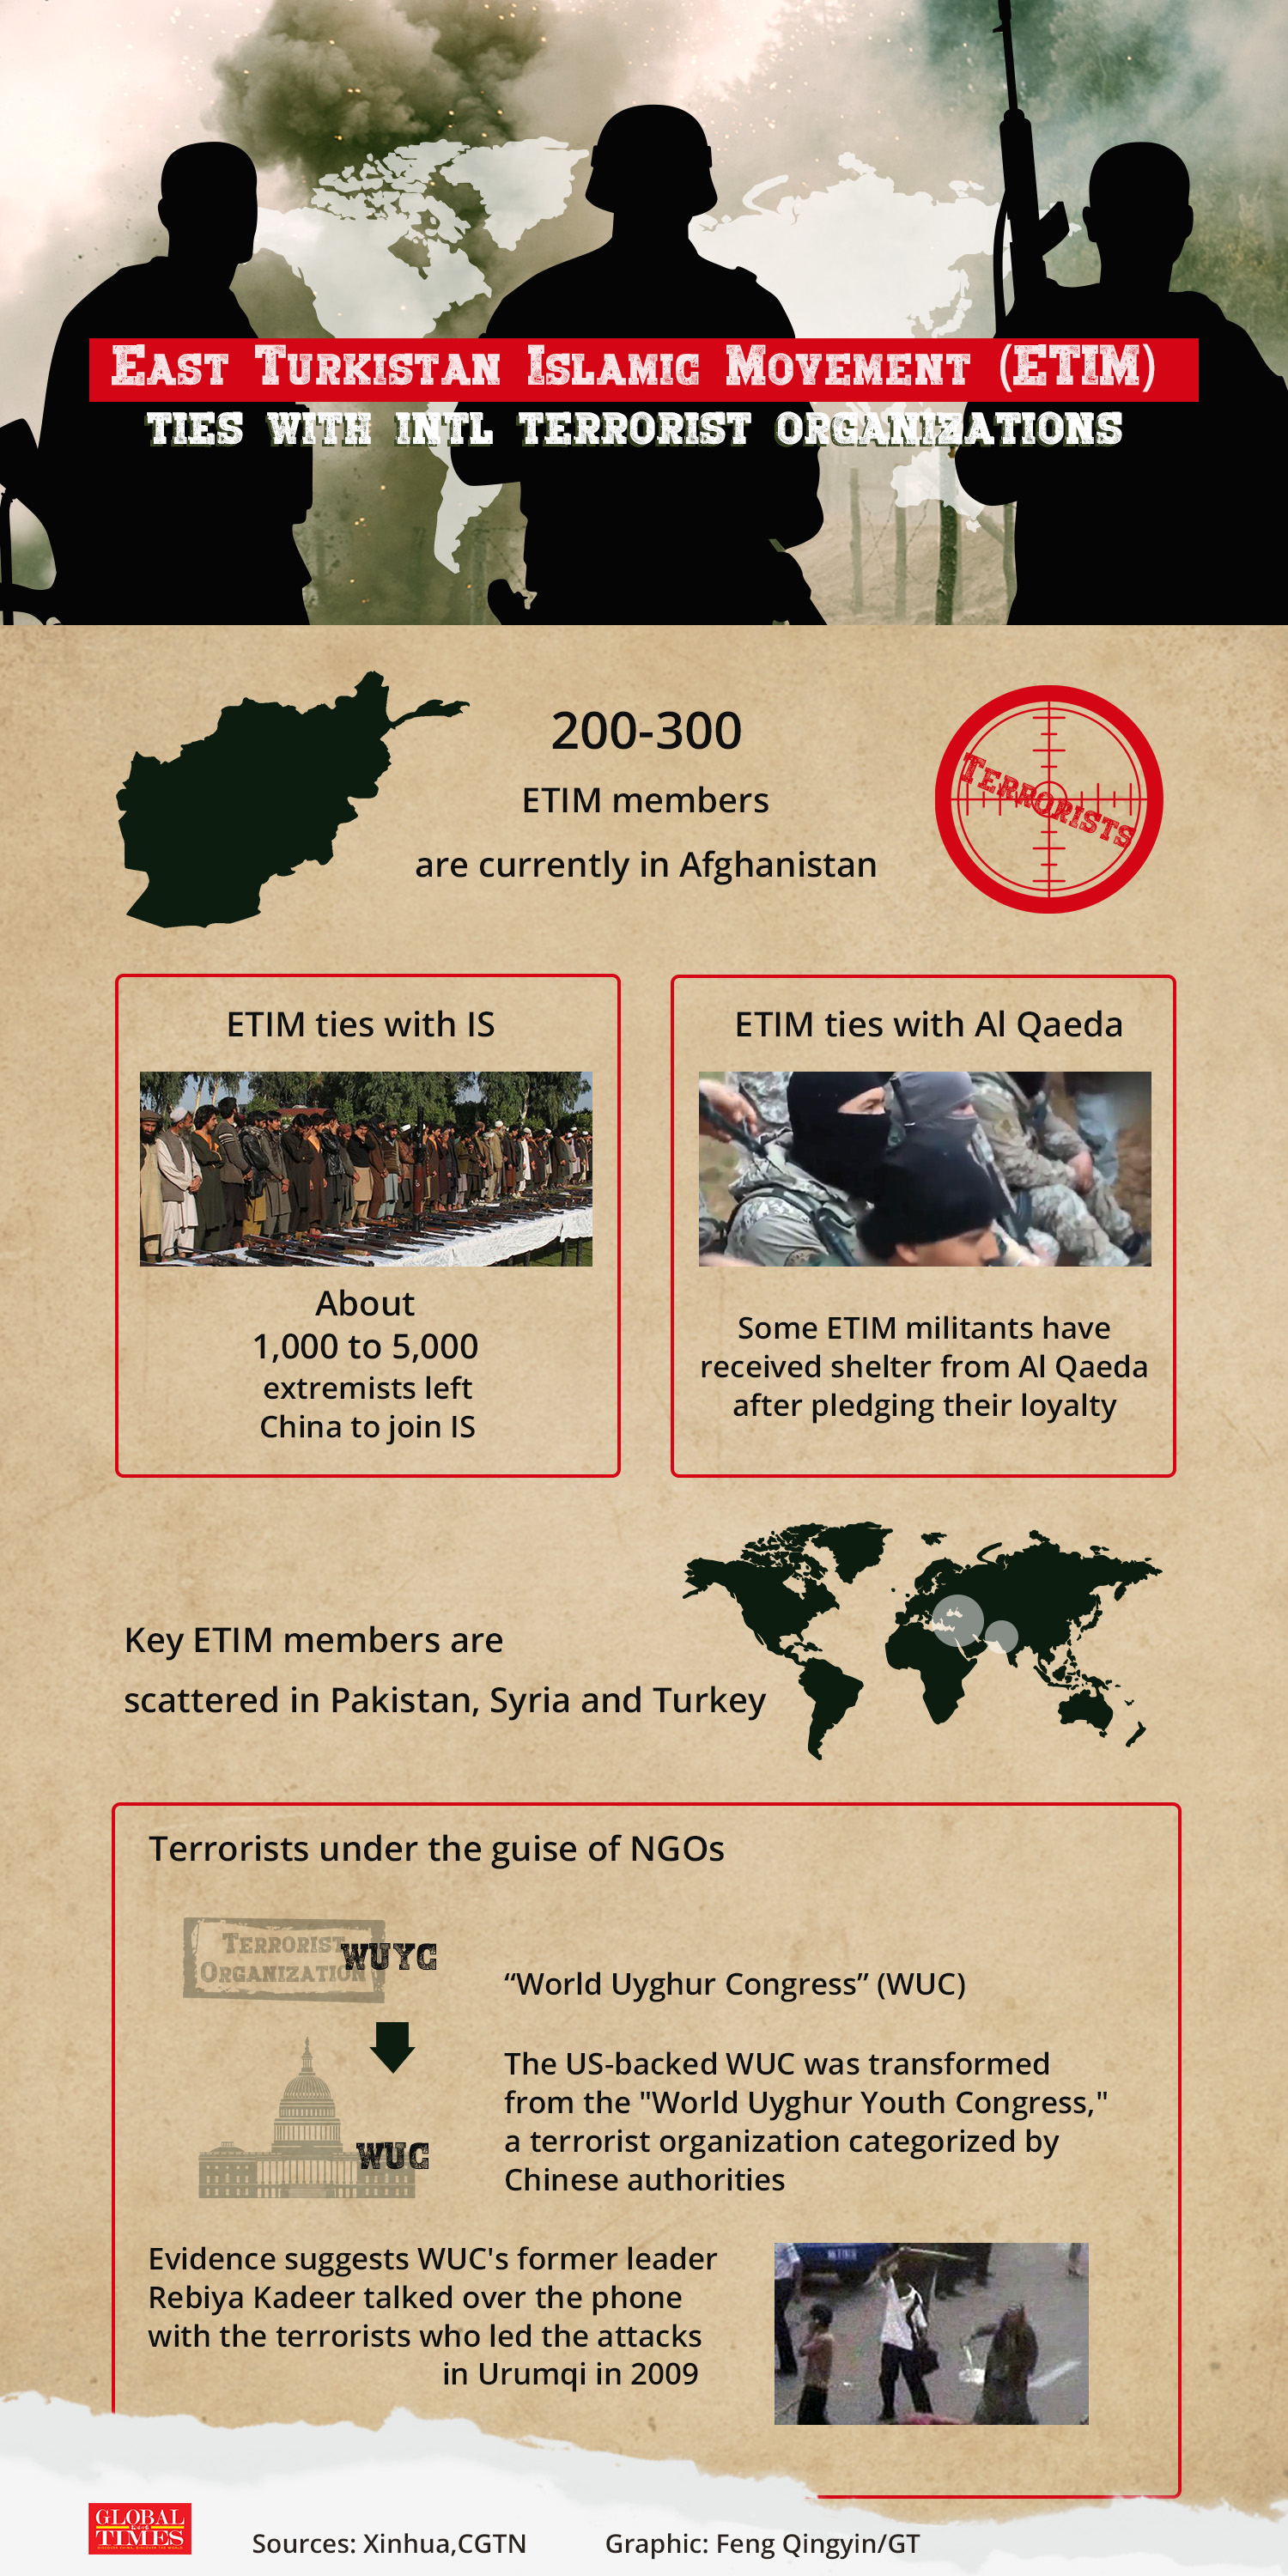 Some ETIM members have whitewashed themselves as activists or set up NGOs with support from Western forces, attempting to cover up their ties with terrorist organizations including ISIS and Al Qaeda. Graphic: Feng Qingyin/GT